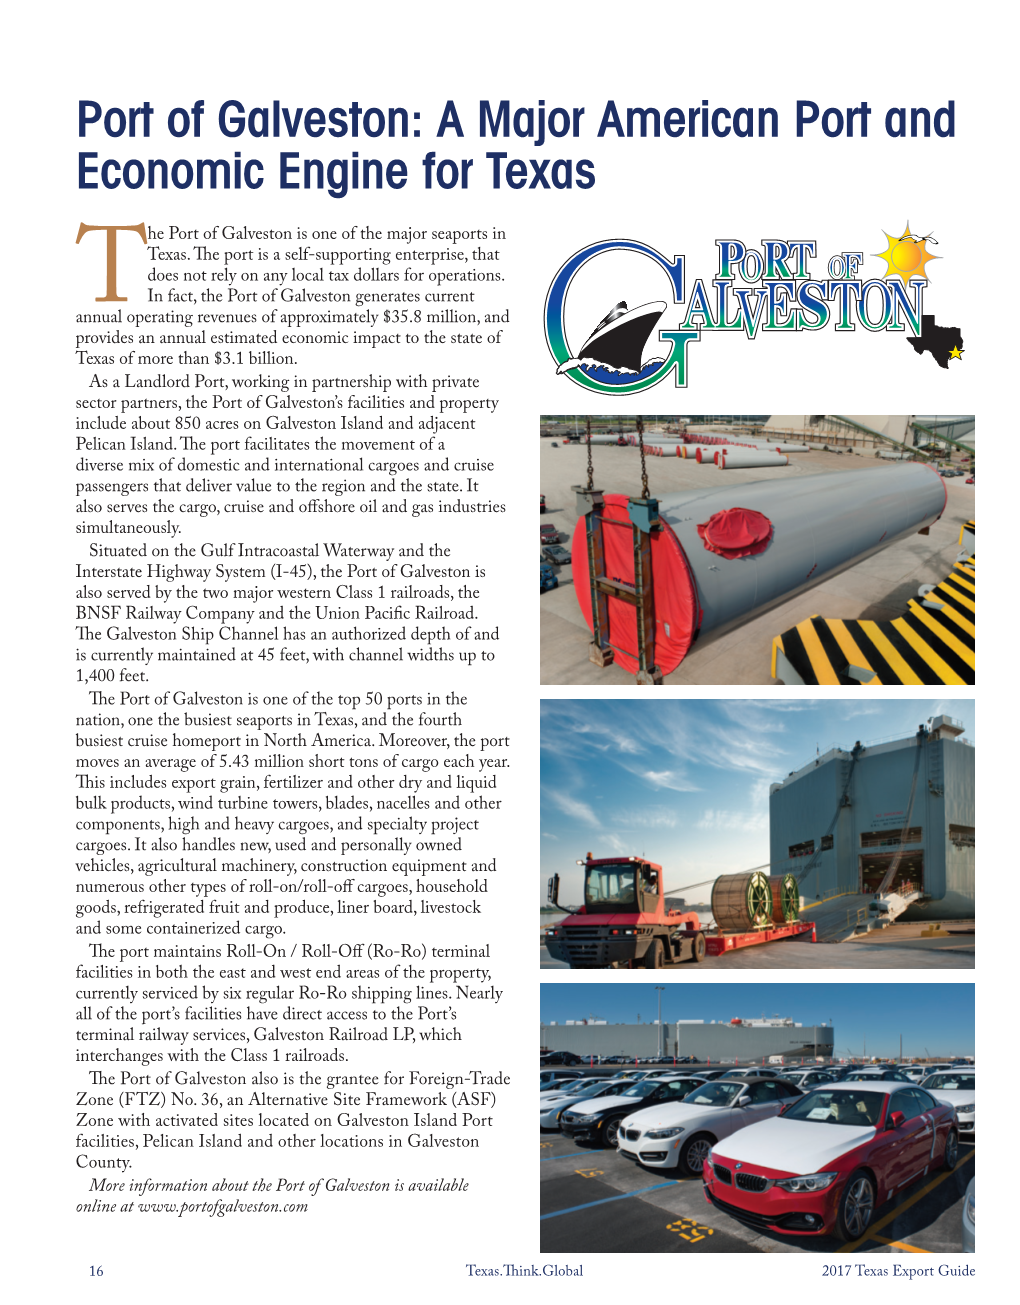 Port of Galveston: a Major American Port and Economic Engine for Texas